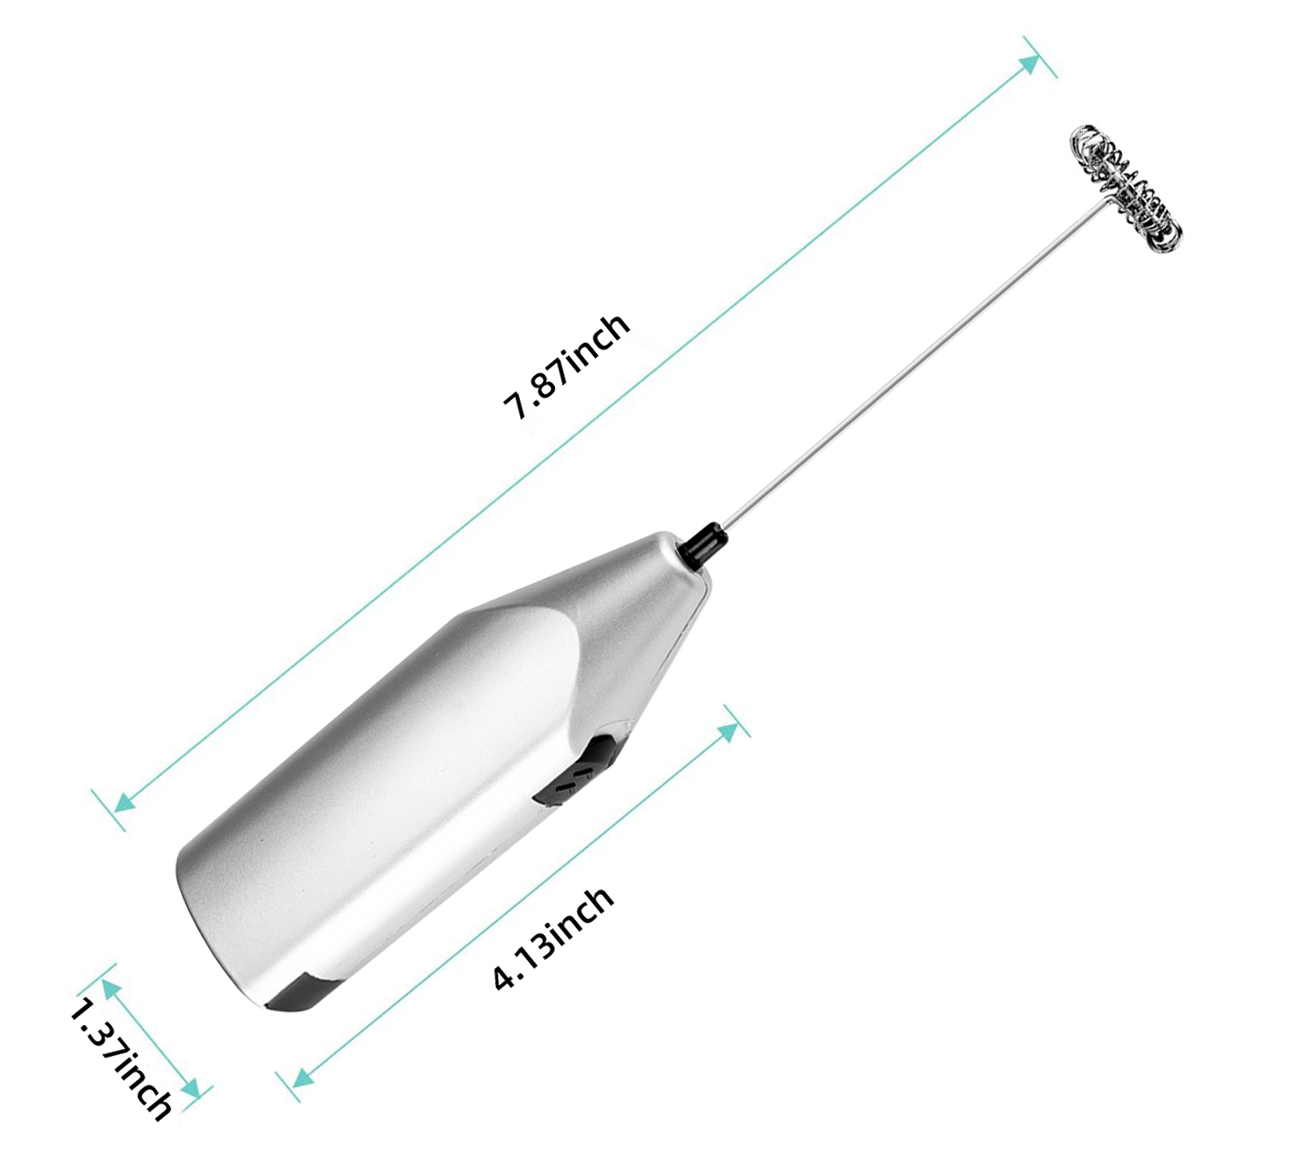 Milk Frother Egg Beater Electric Spring Head Milk Bubble for Large Cup of Milks Thick Creamy Foam Hot Cold Drinks Latte Cappuccino Foamed Coffee Drink, Silver - image 5 of 8